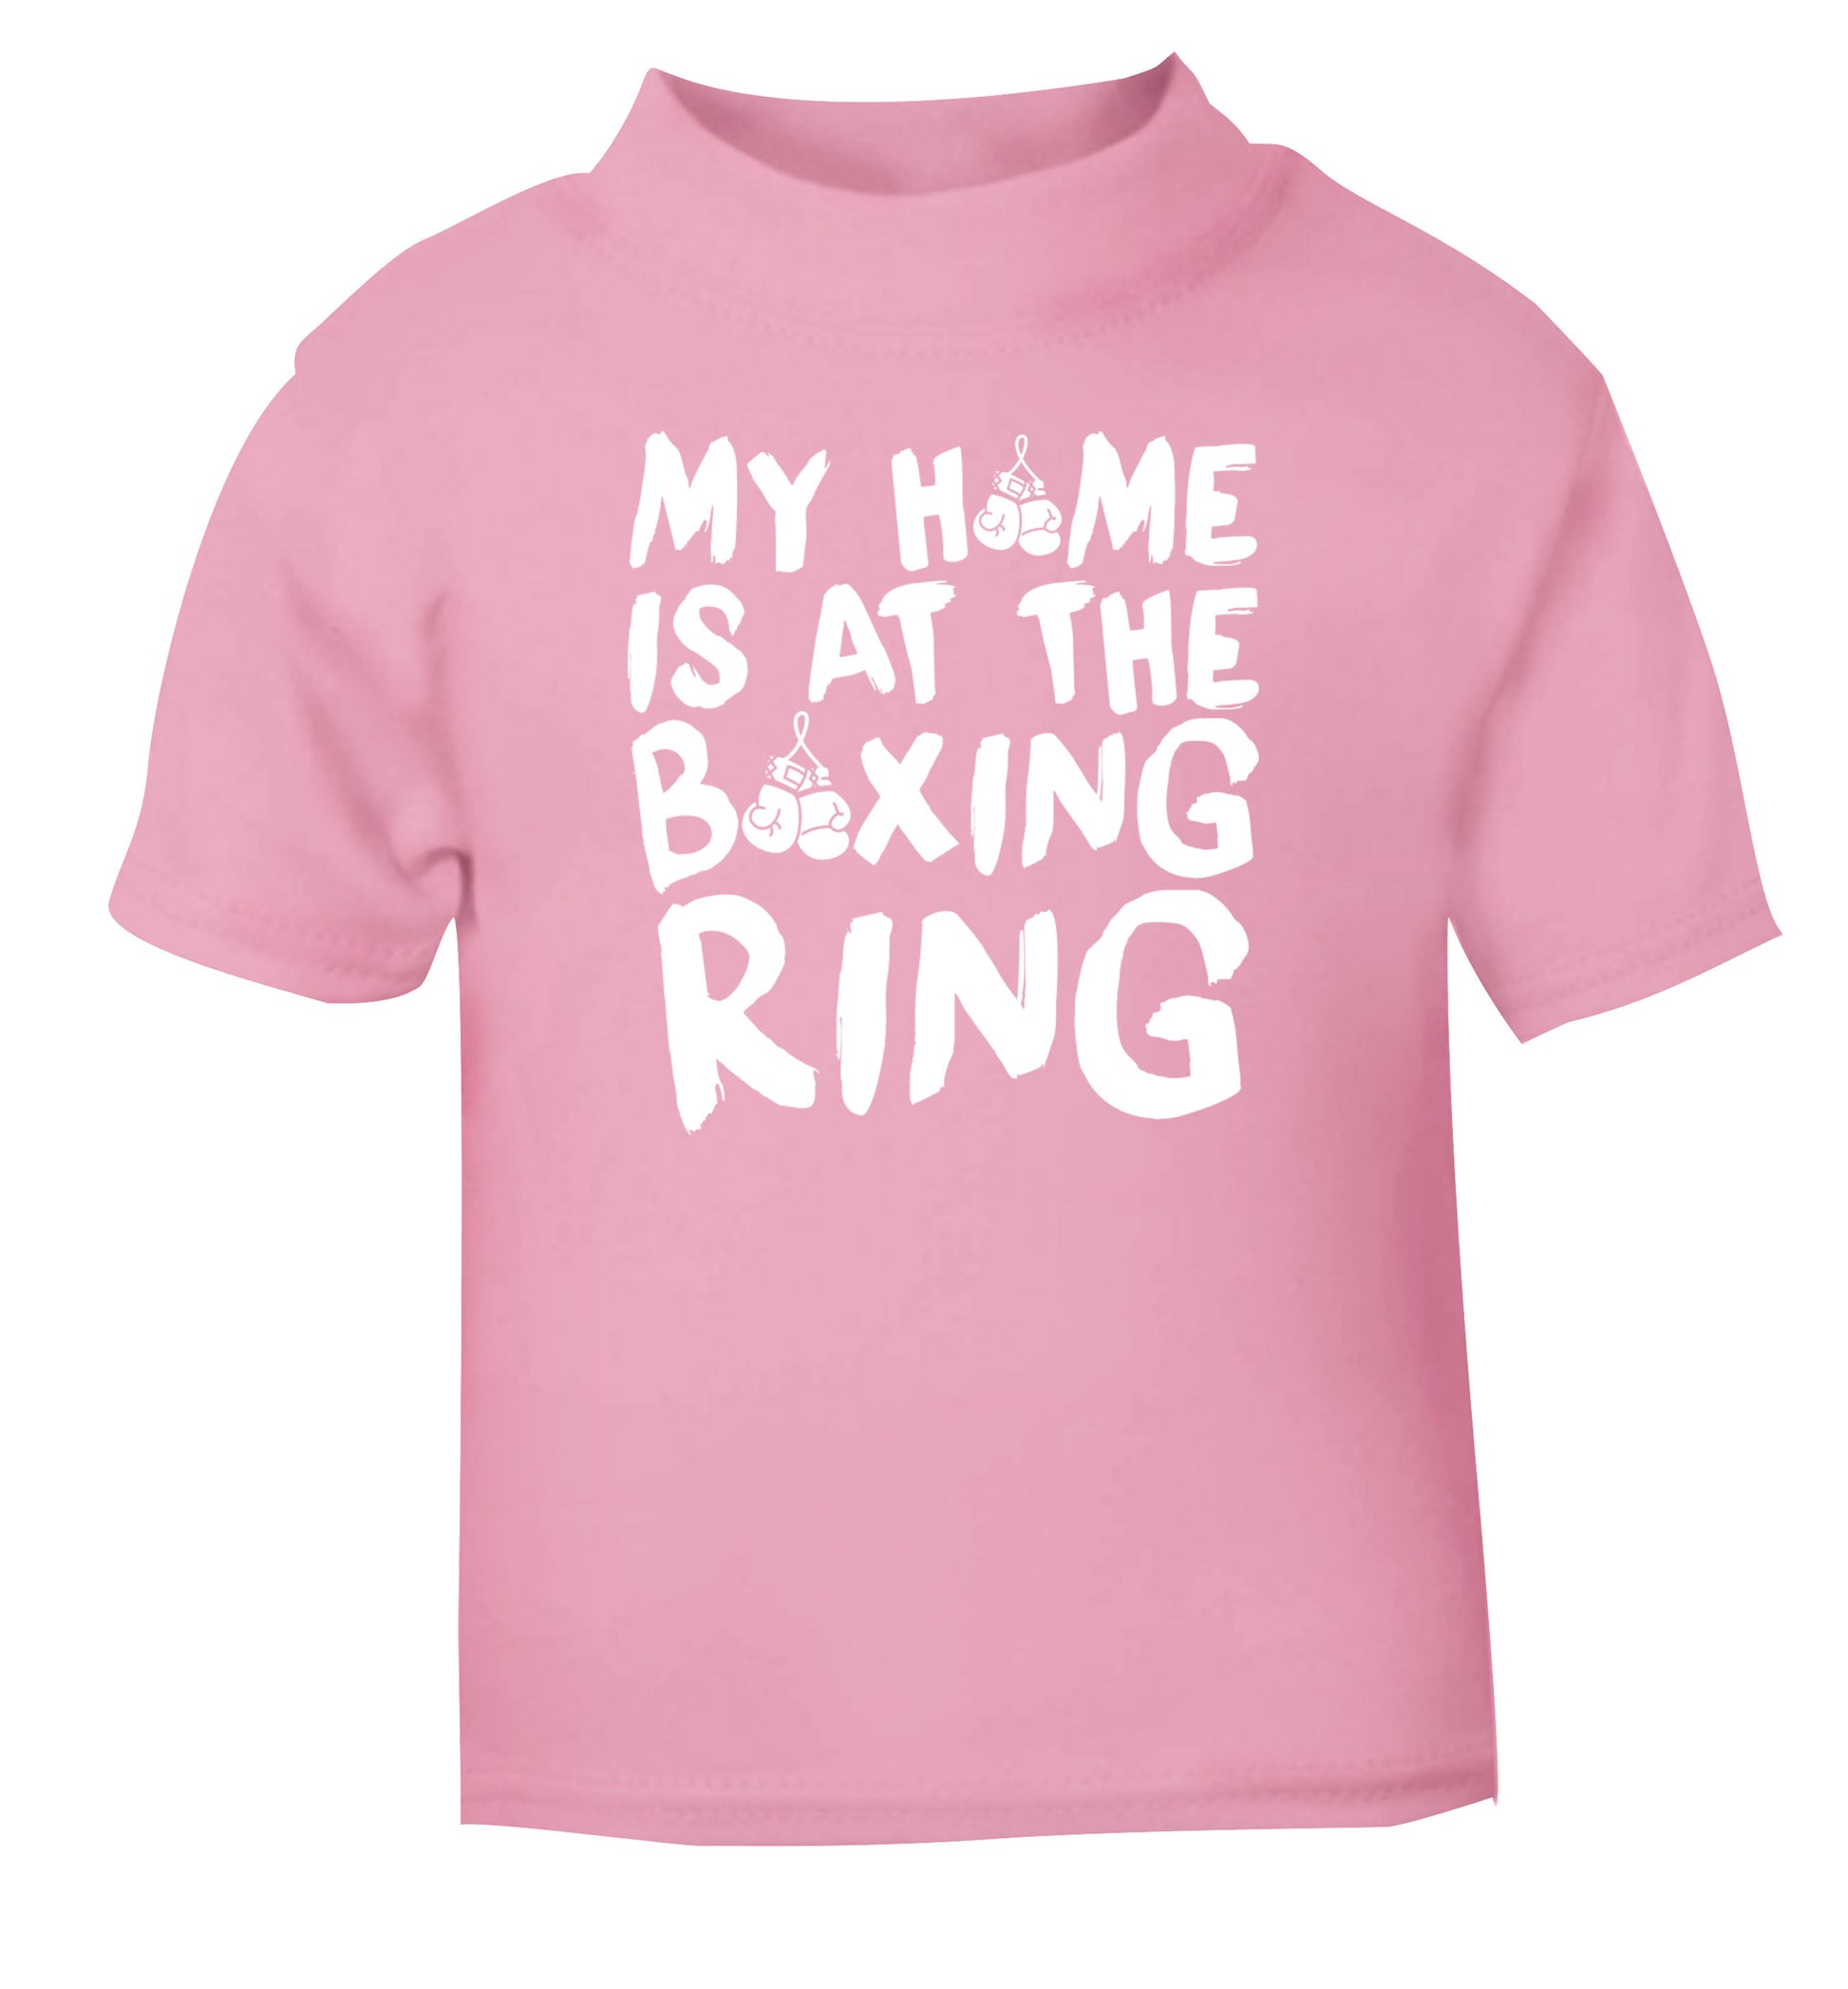 My home is at the boxing ring light pink Baby Toddler Tshirt 2 Years